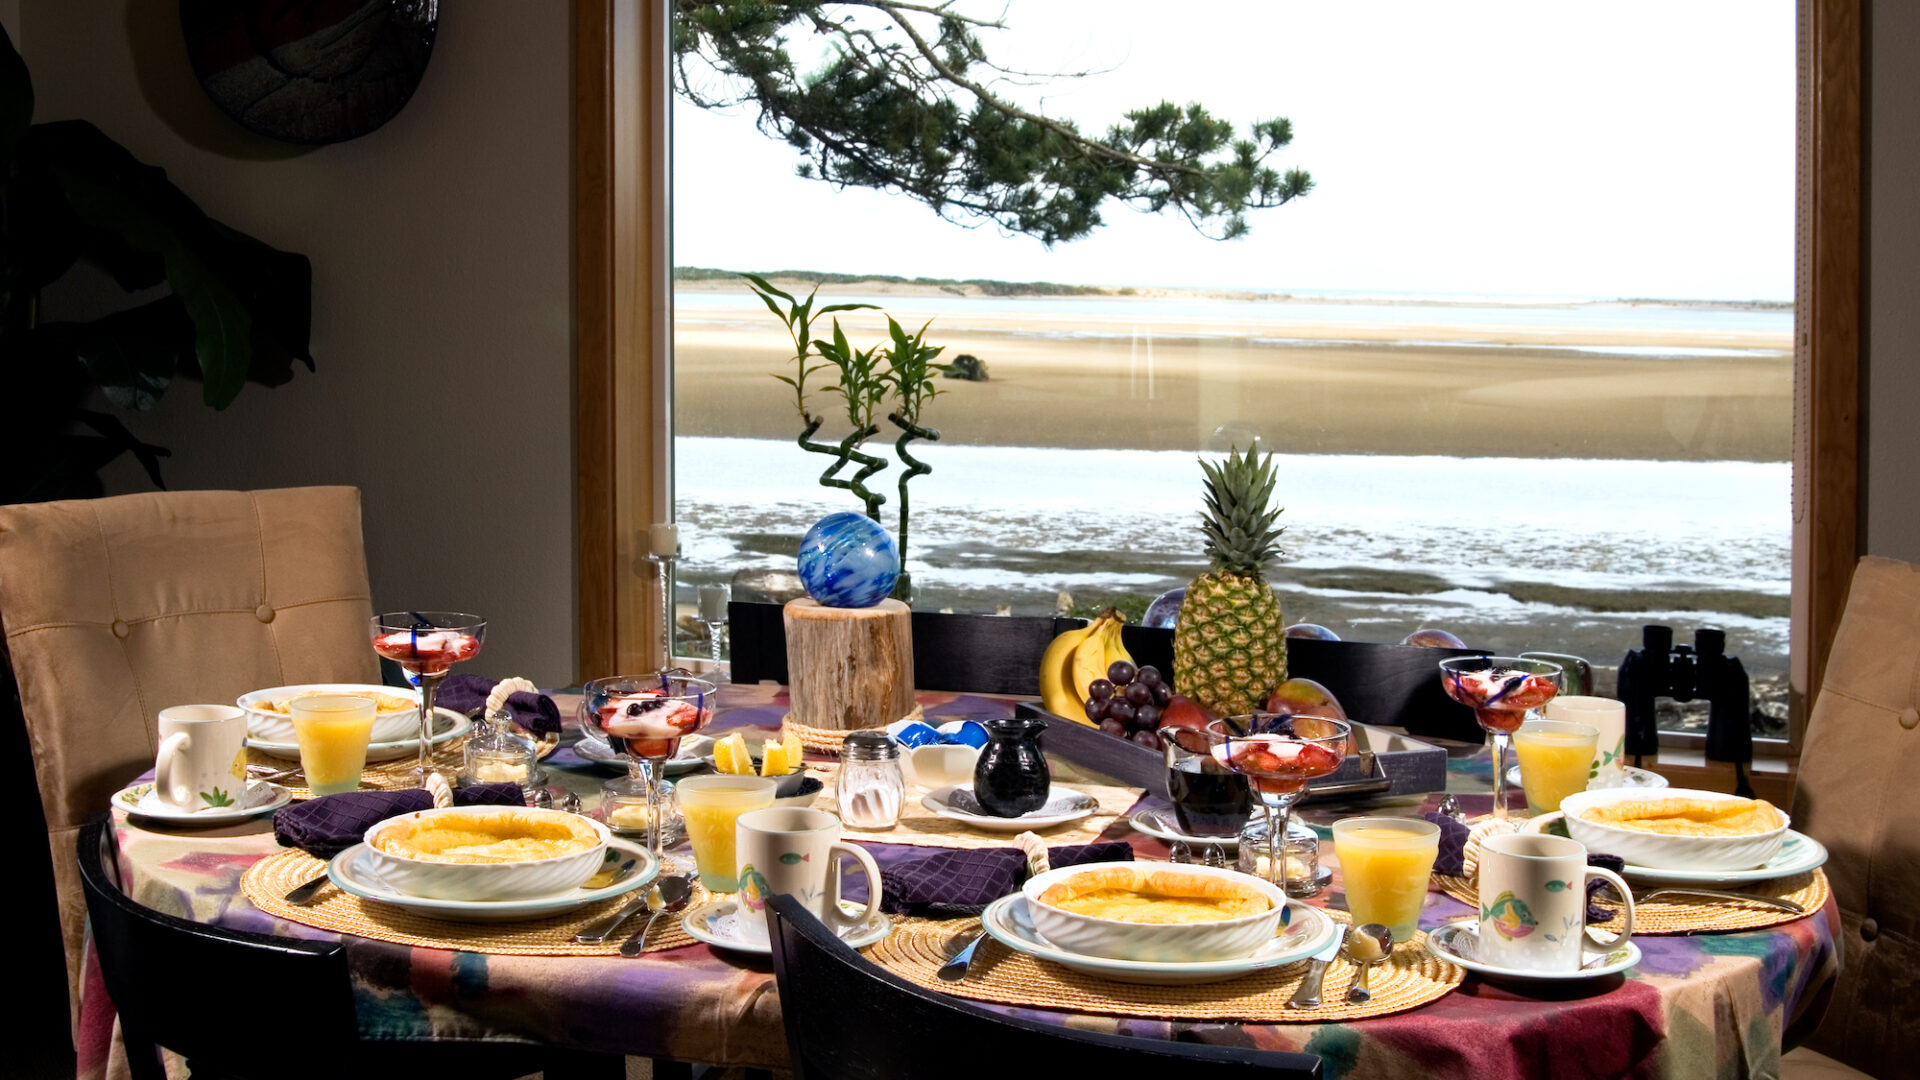 Breakfast with a view at Baywood Shores Bed and Breakfast